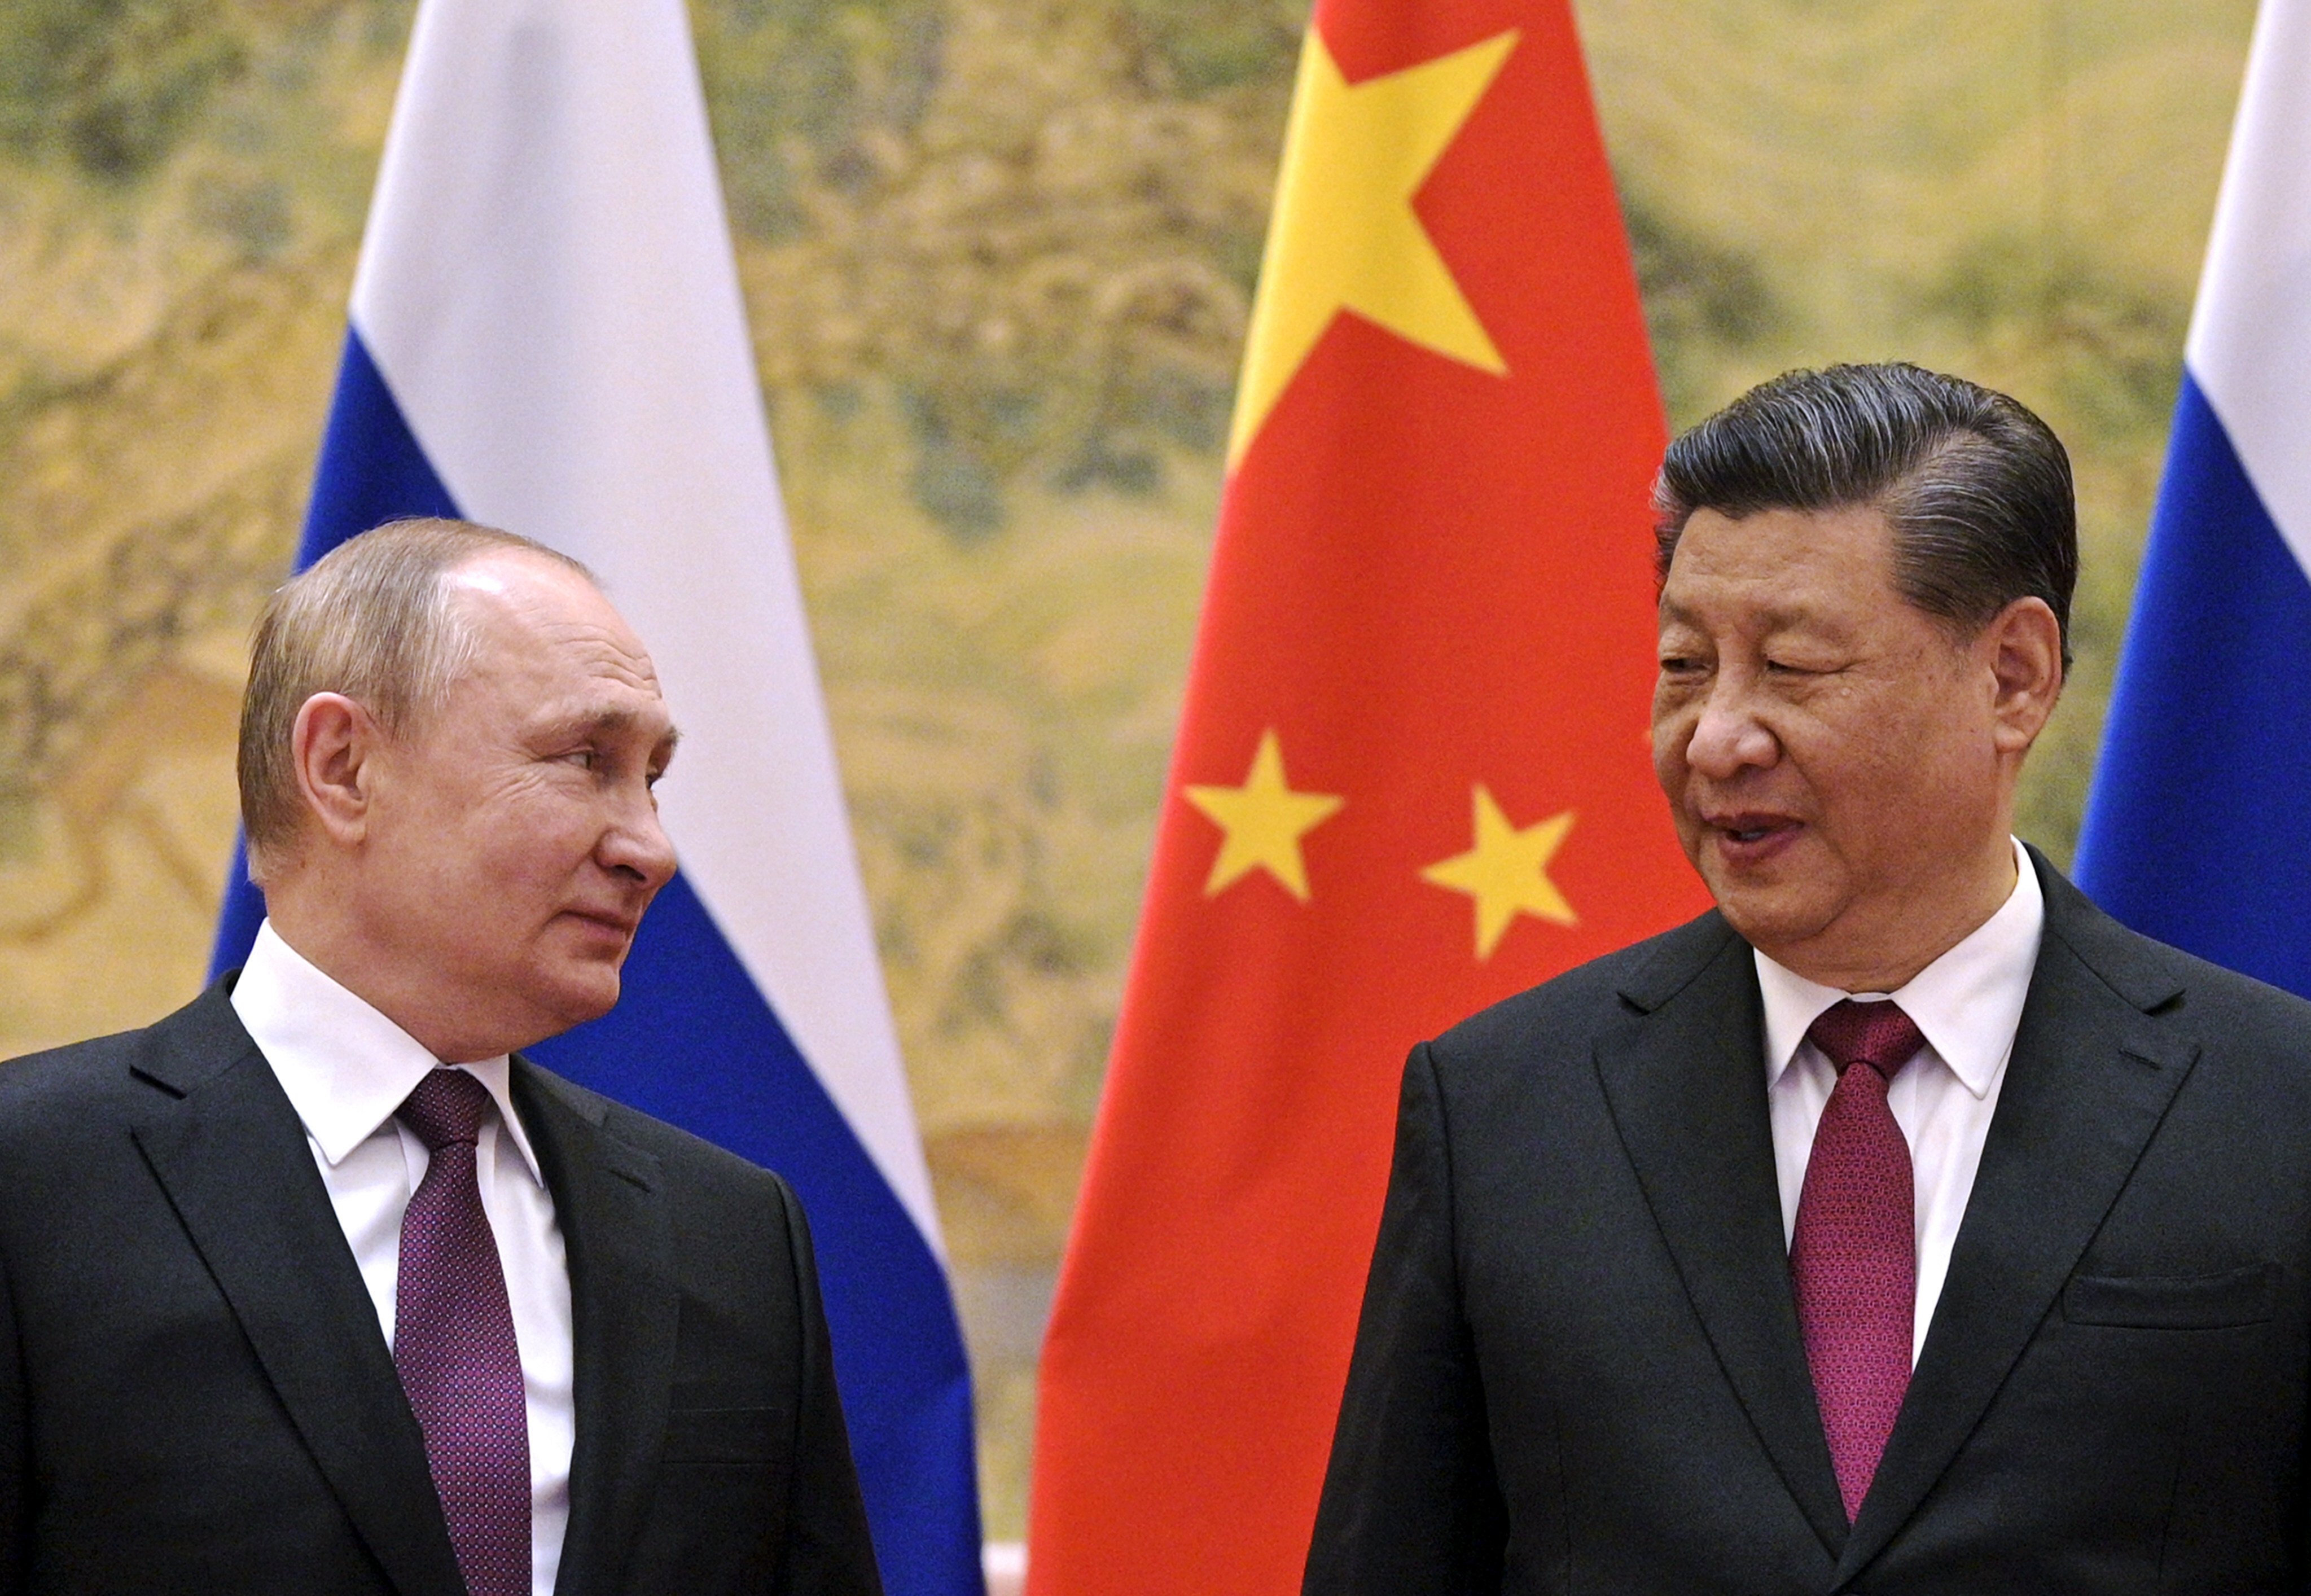 Russian President Vladimir Putin and Chinse President Xi Jinping in Beijing on February 4 declaring their nations’ partnership had “no limits”. A new survey has found Americans now consider China’s relationship with Russia a serious concern for the United States. Photo: AP 